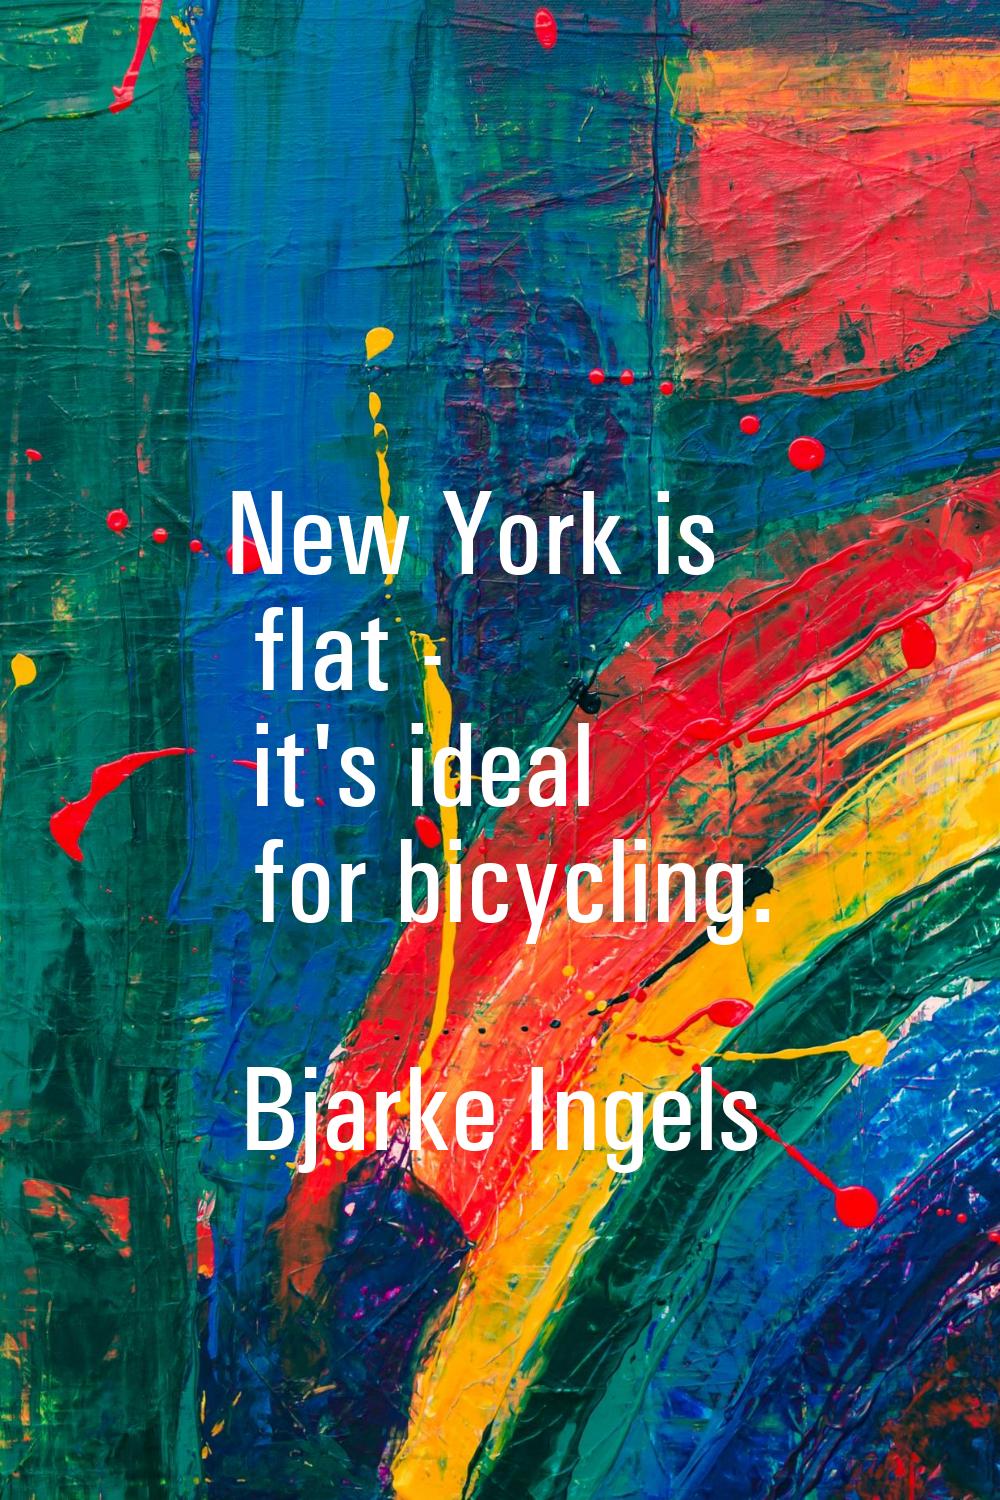 New York is flat - it's ideal for bicycling.